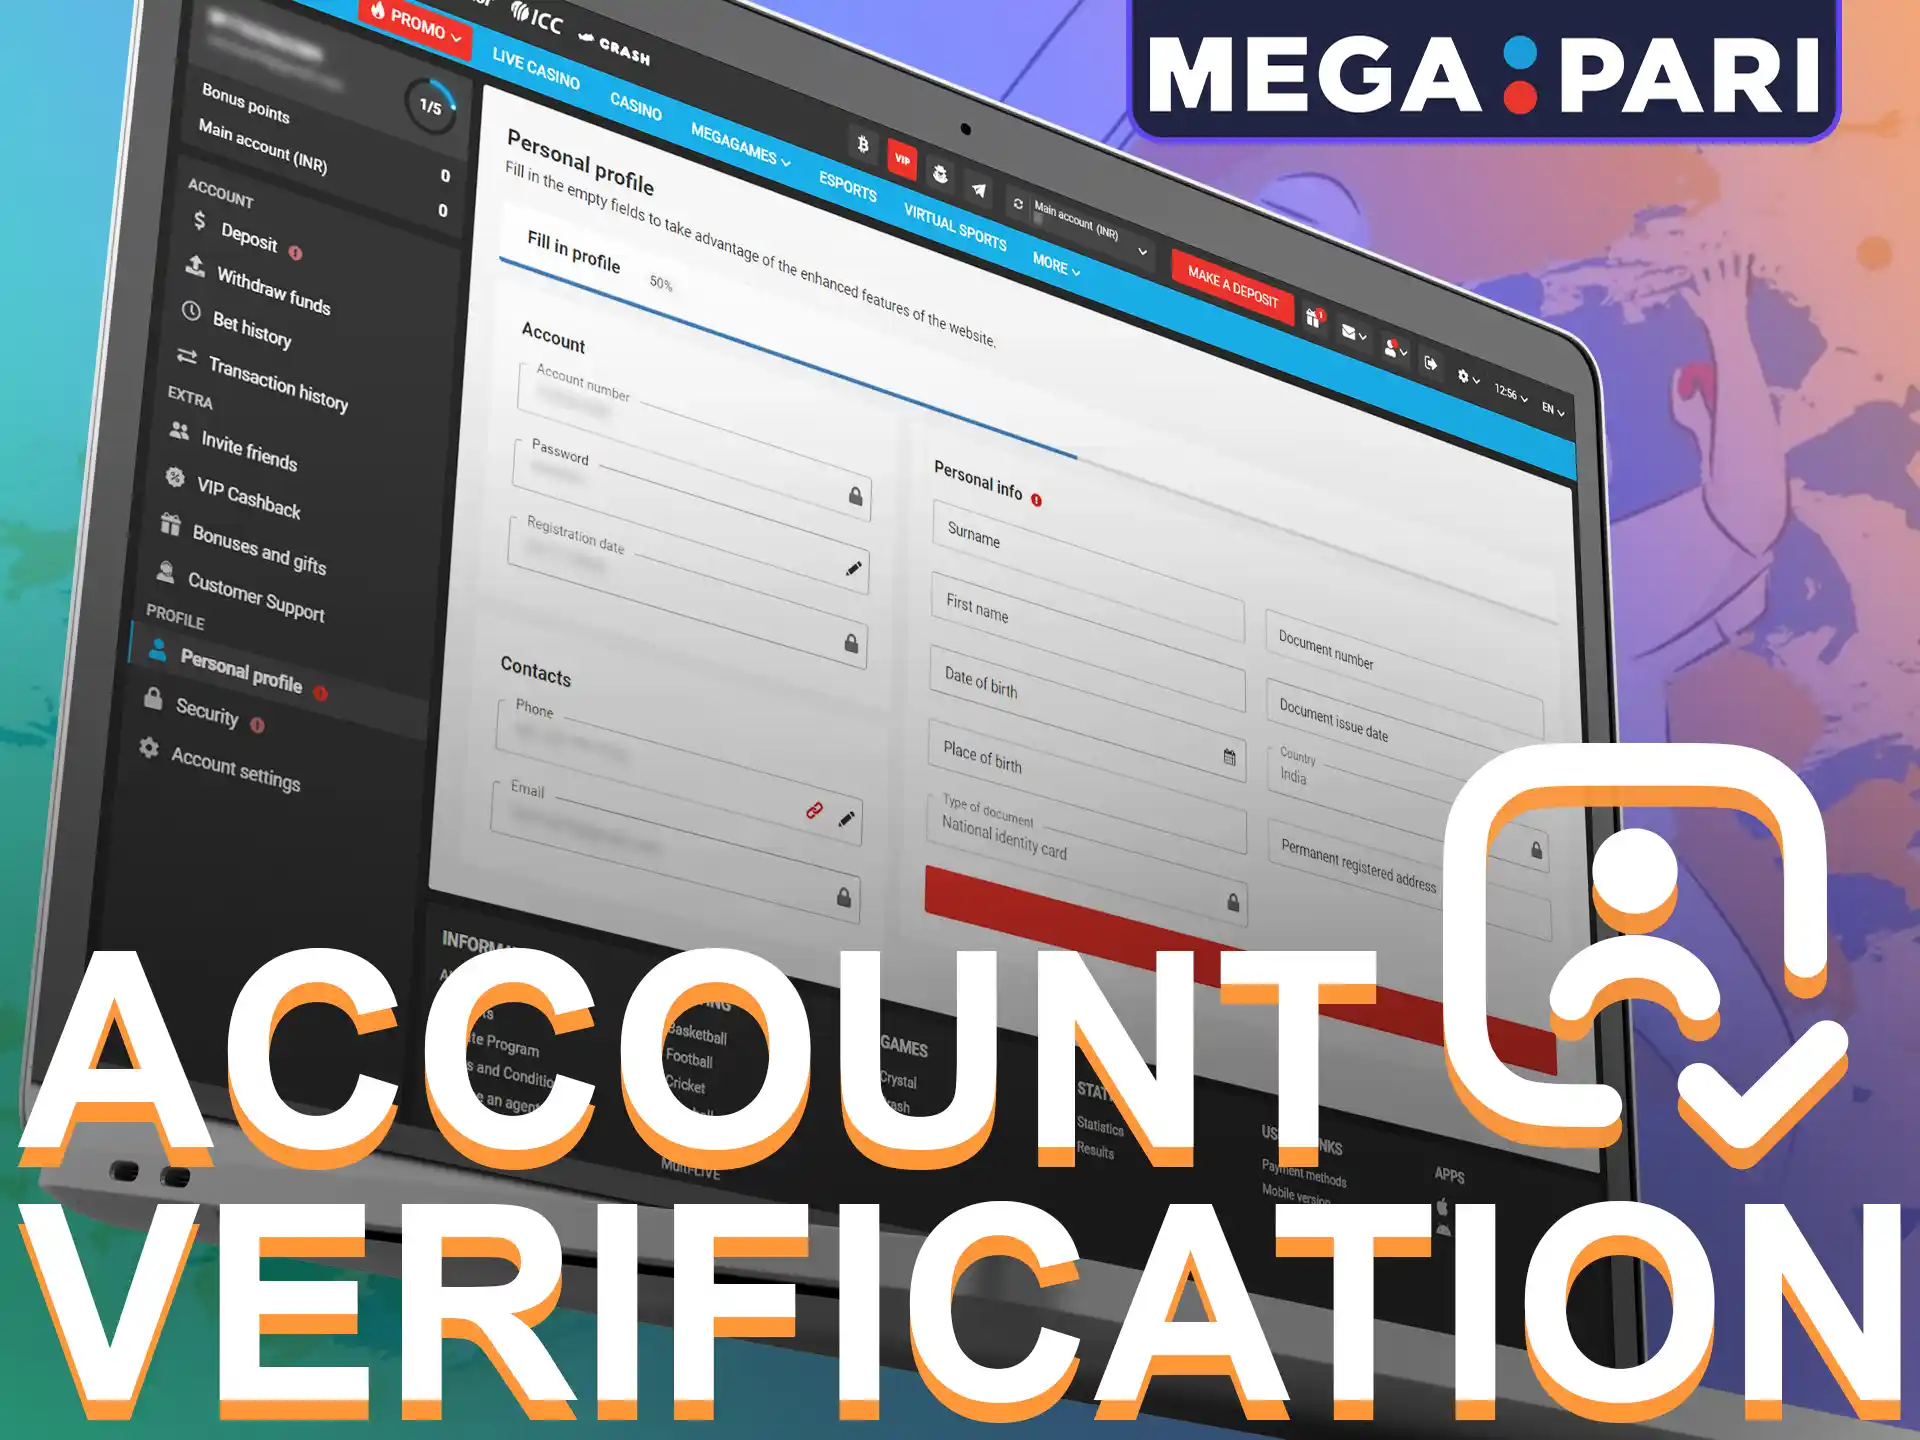 The verification process at Megapari is very quick and easy.